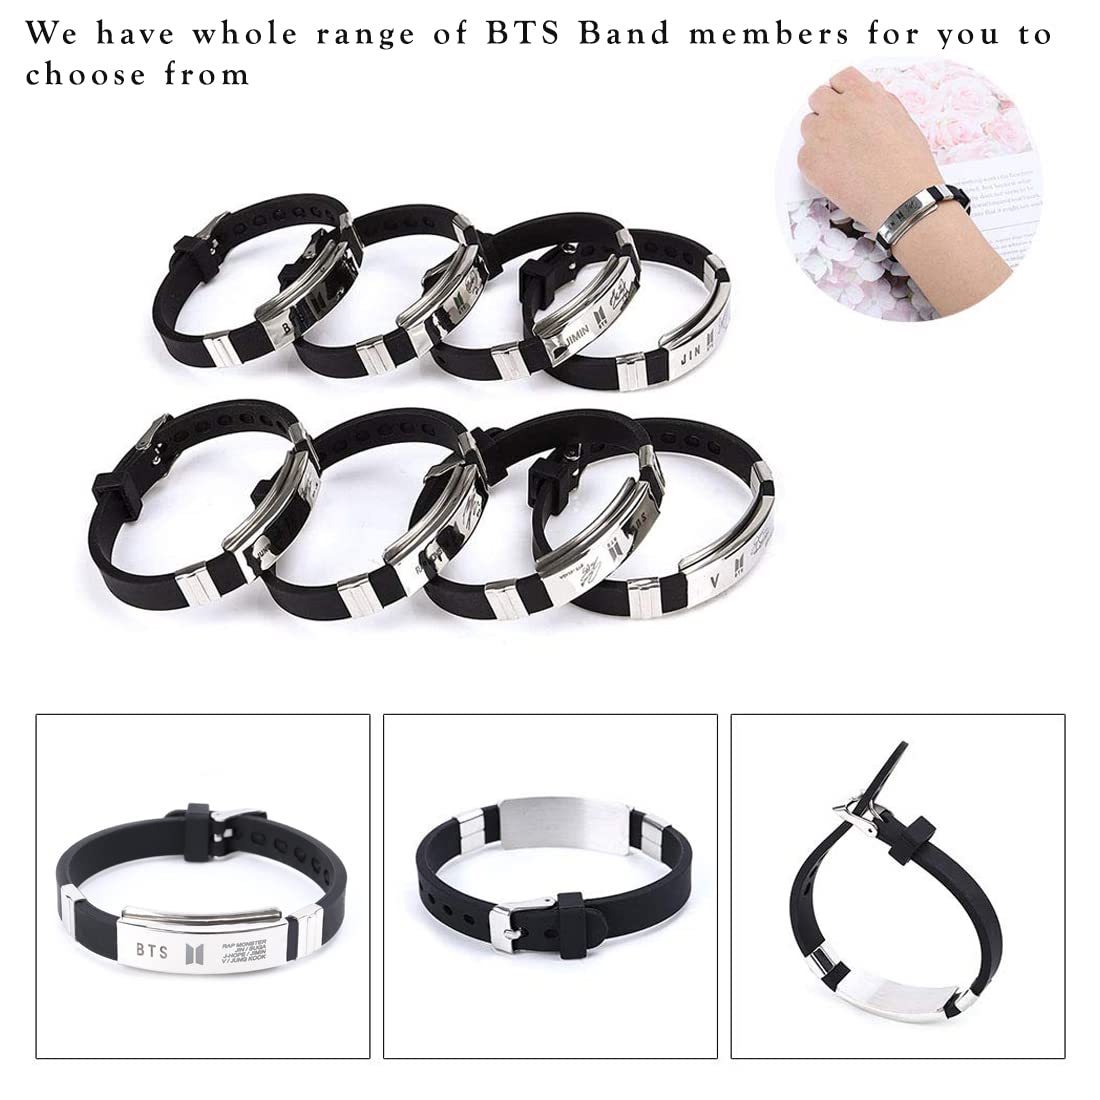 Kpop BTS Stainless Steel Silicon Wristband Bangtan Boys Unisex Bracelet  Jungkook Jimin V Suga at Rs 686/piece | Accessories in New Delhi | ID:  23092286091